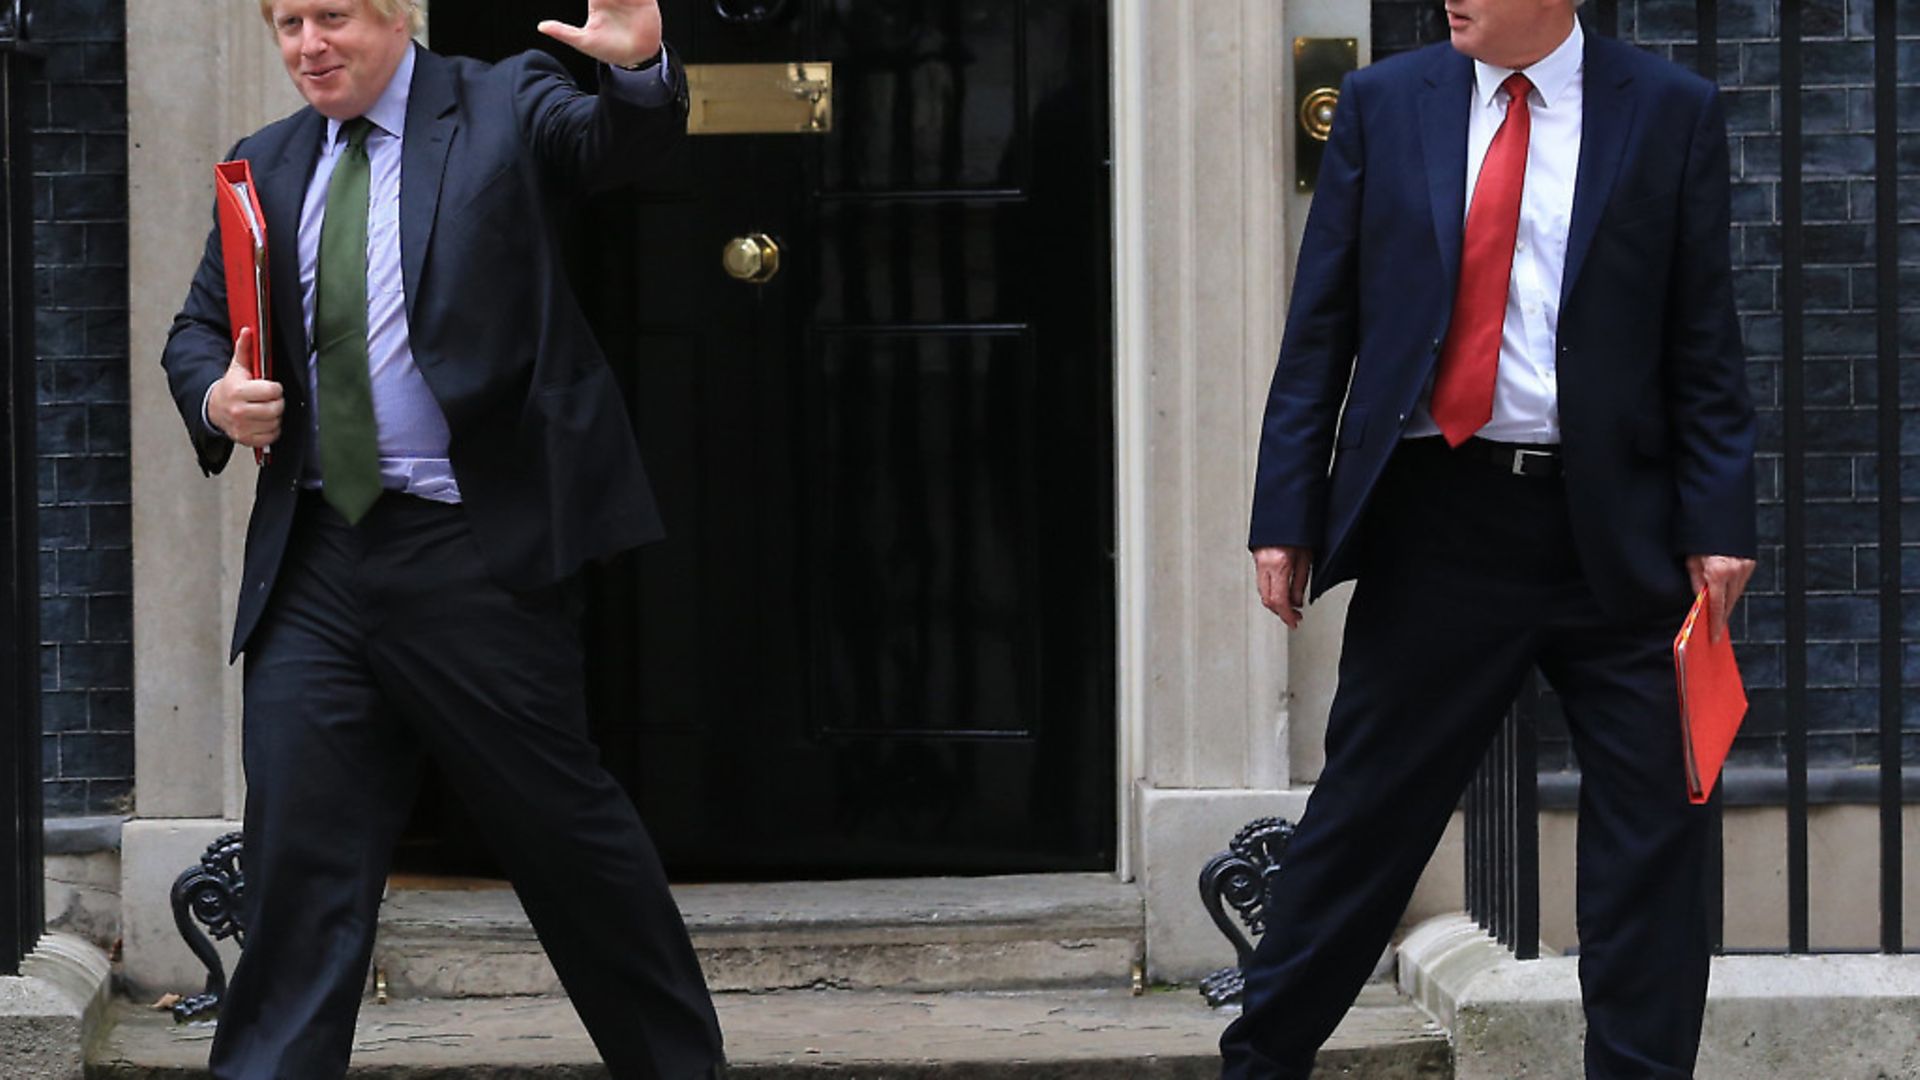 Boris Johnson and David Davis who have resigned from the government
Photo: PA / Gareth Fuller - Credit: PA Wire/PA Images